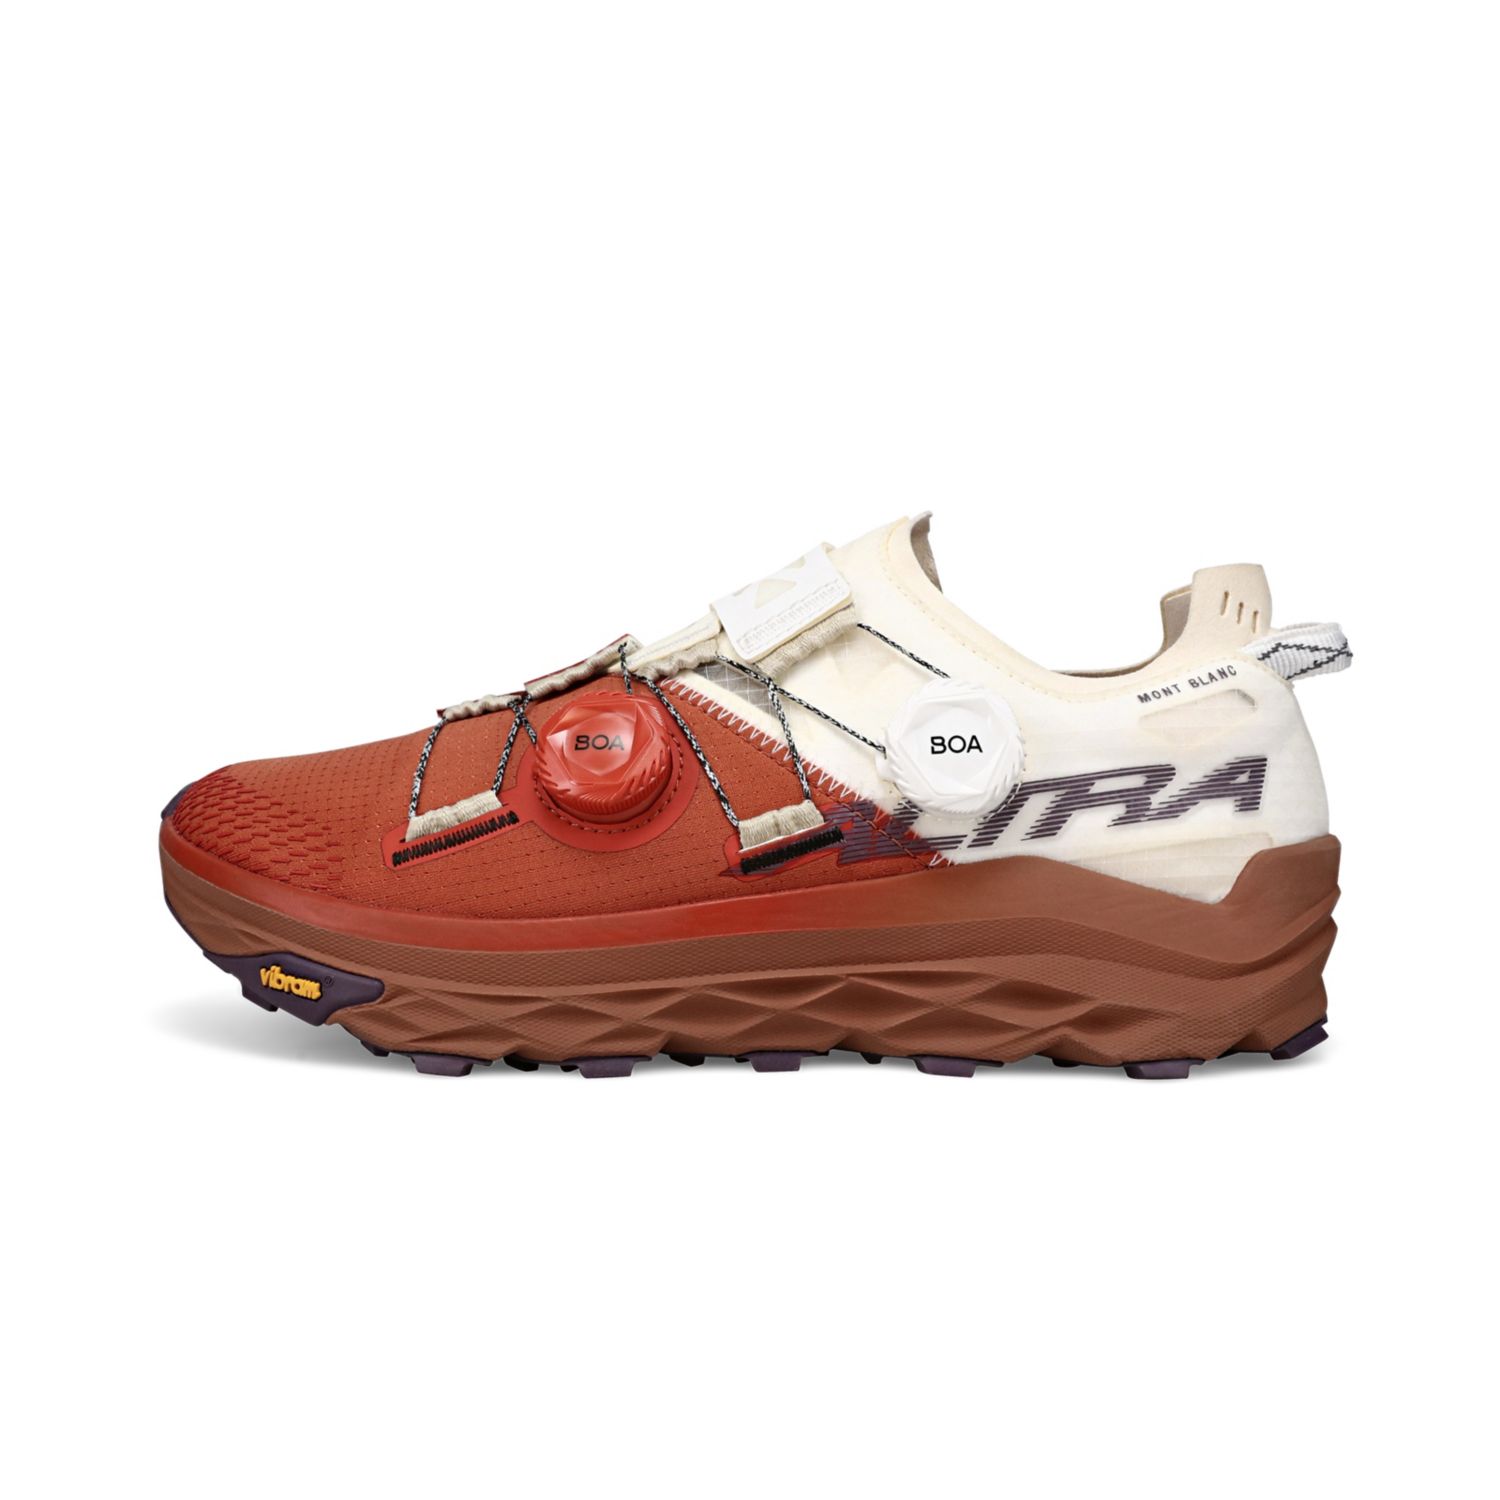 Altra Mont Blanc Boa Women's Trail Running Shoes Burgundy | South Africa-54273919